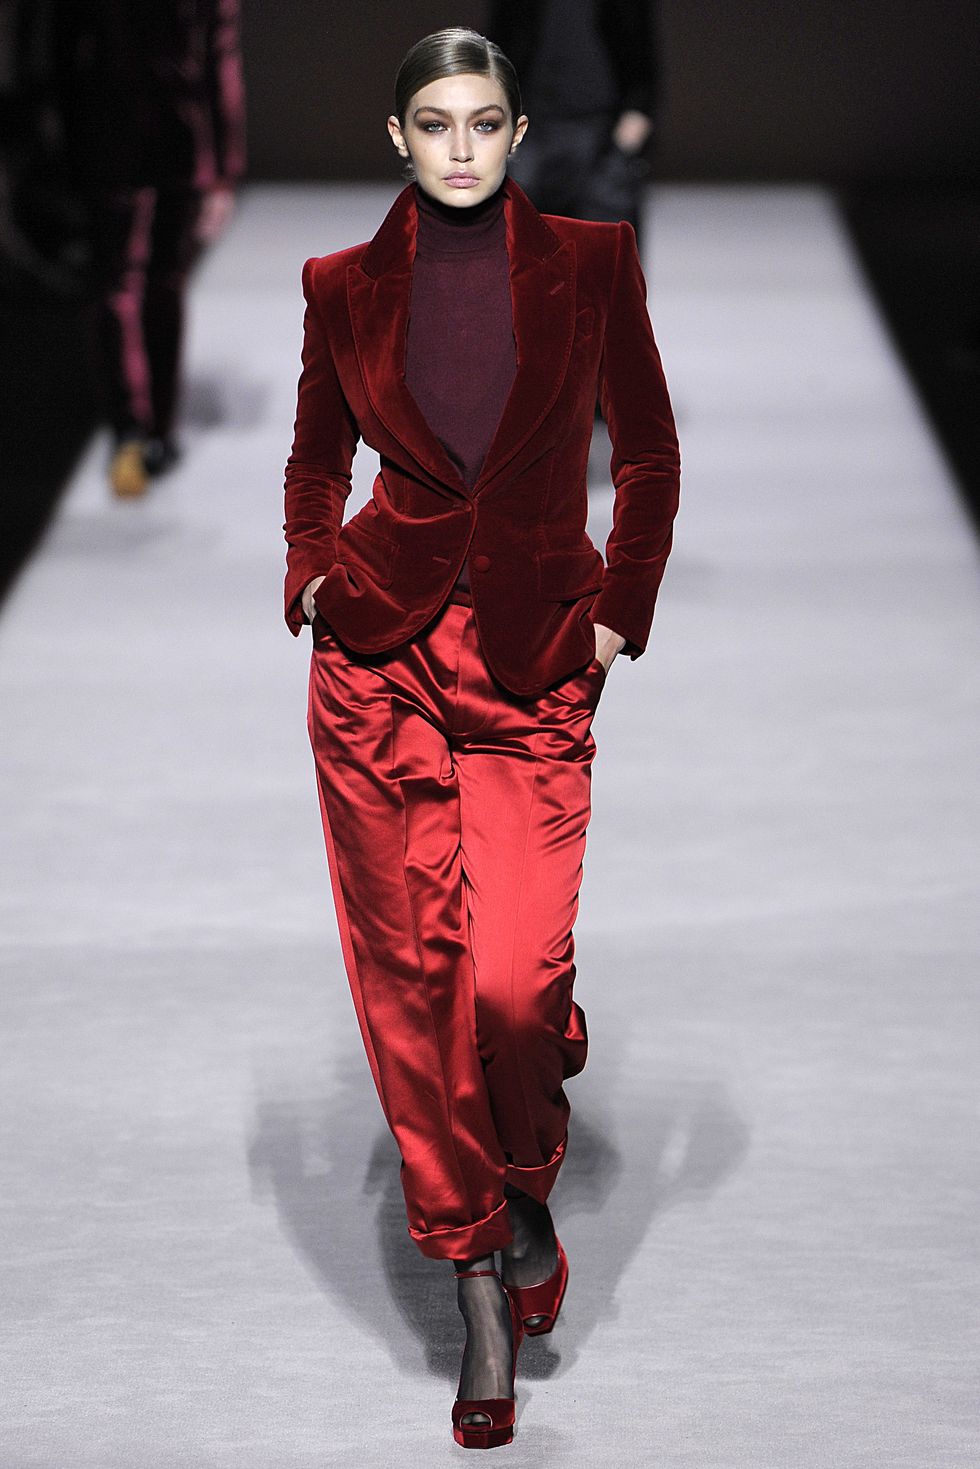 Tom Ford Fall 2021 Menswear Collection